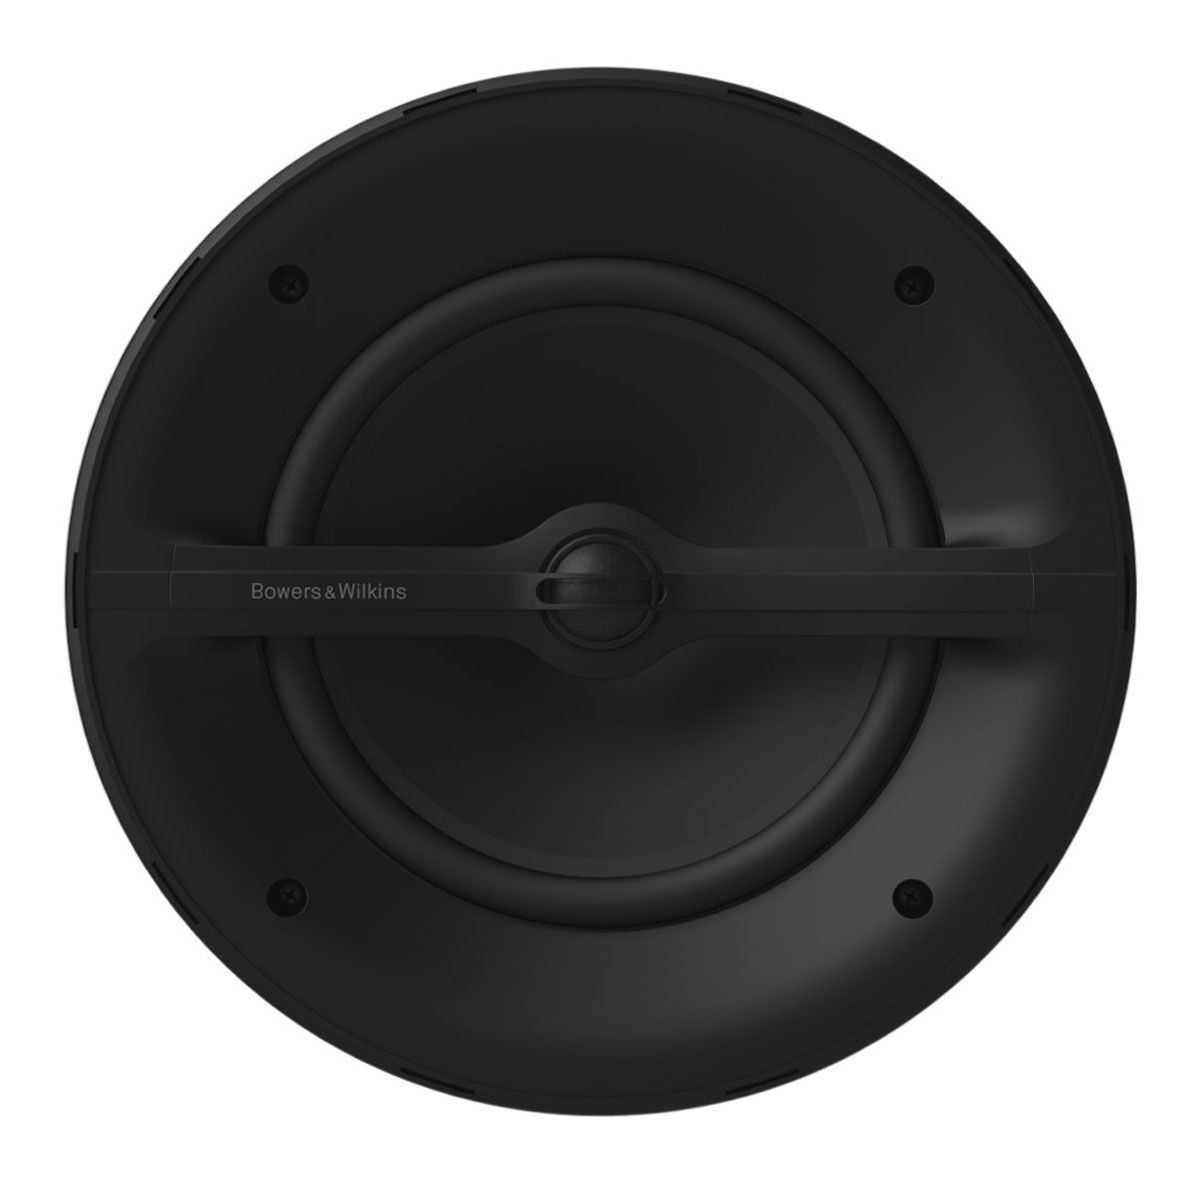 Bowers & Wilkins Marine 6 Two-way Loudspeaker without grill